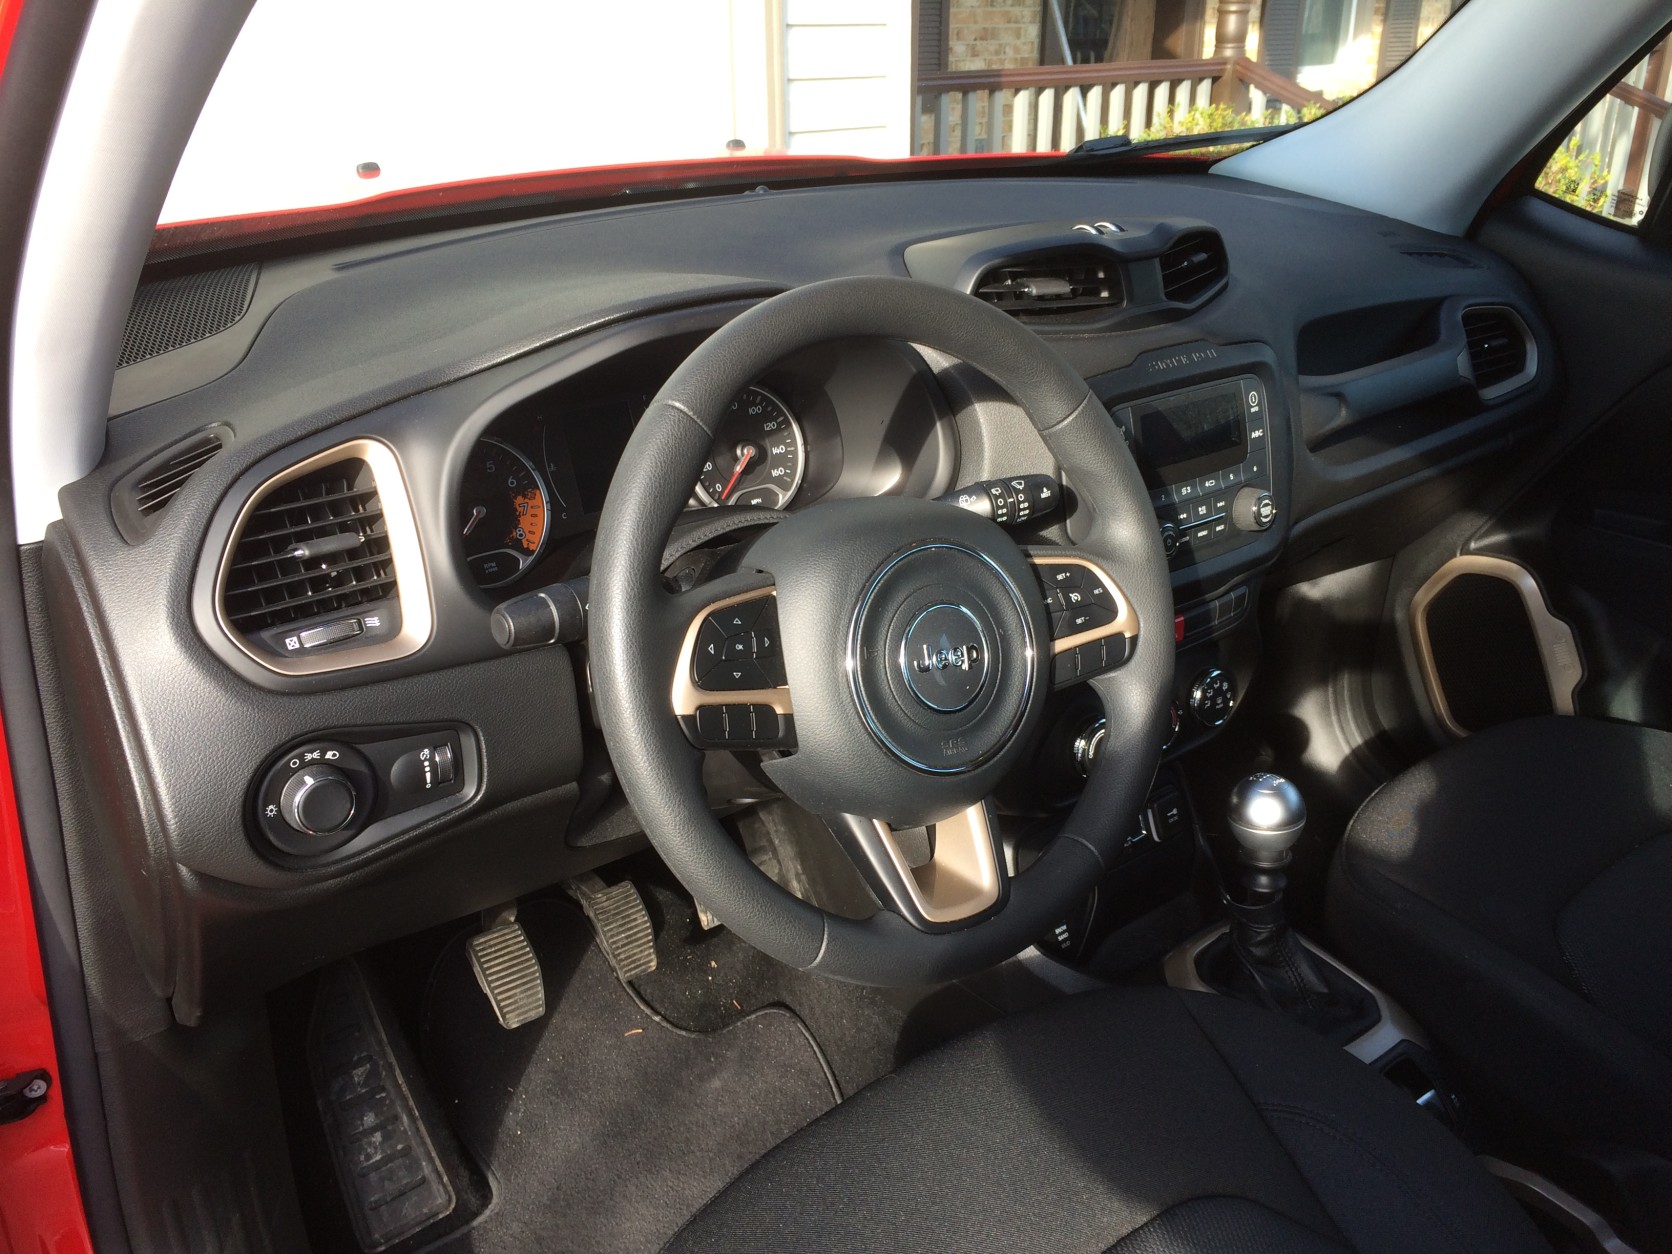 The interior is a nice quality for the price and the space inside is surprising for this compact crossover. (WTOP/Mike Parris)